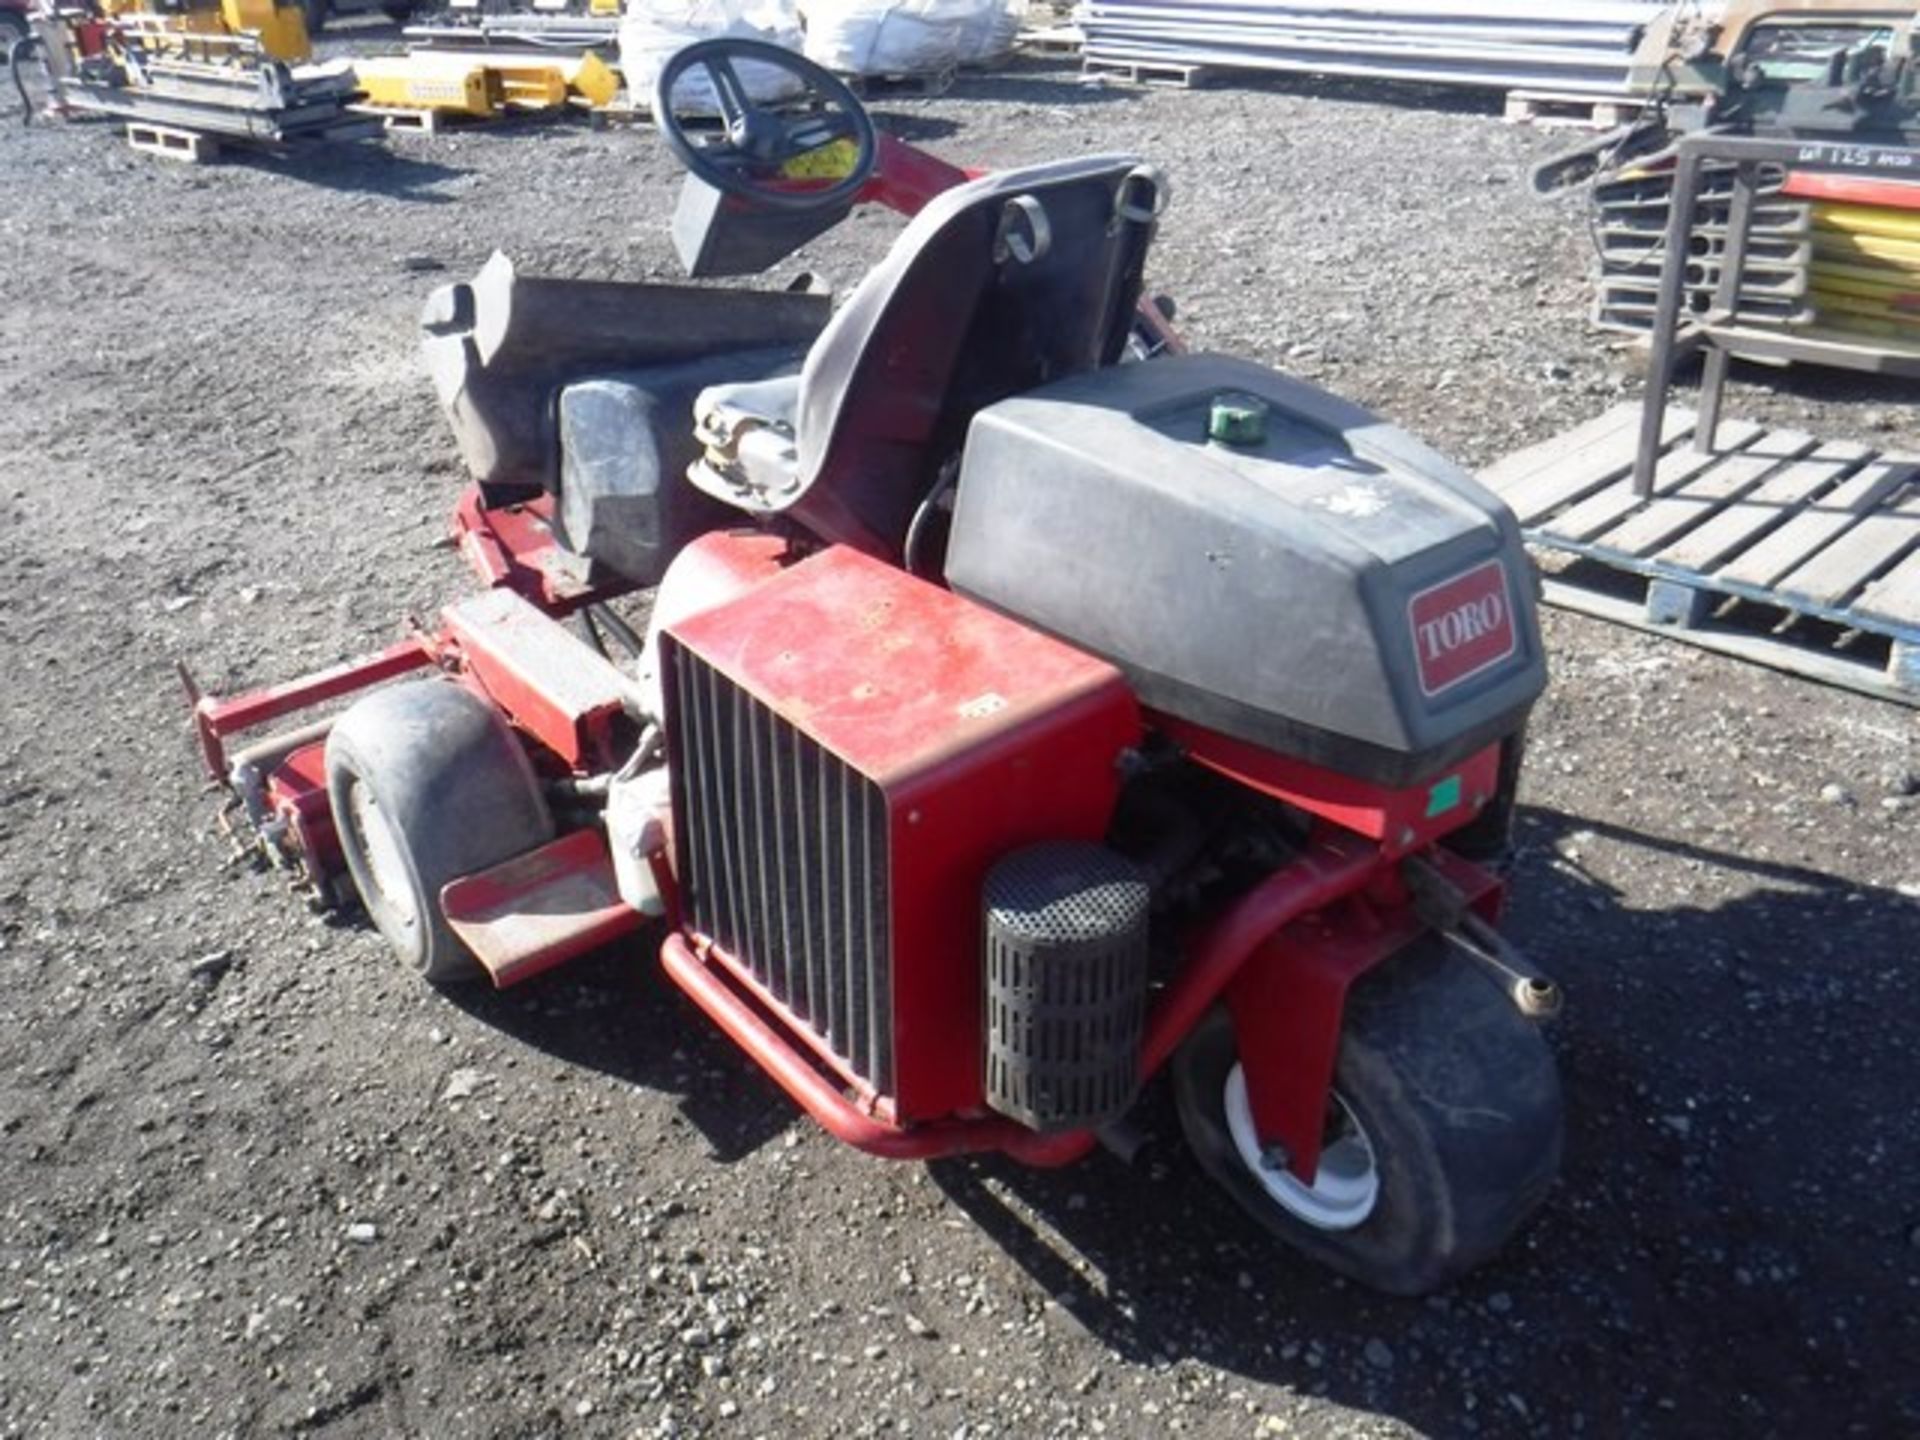 TORO 3000D RIDE ON LAWNMOWER, SN 04375 50444, 4372 HOURS (NOT VERIFIED) - Image 3 of 4